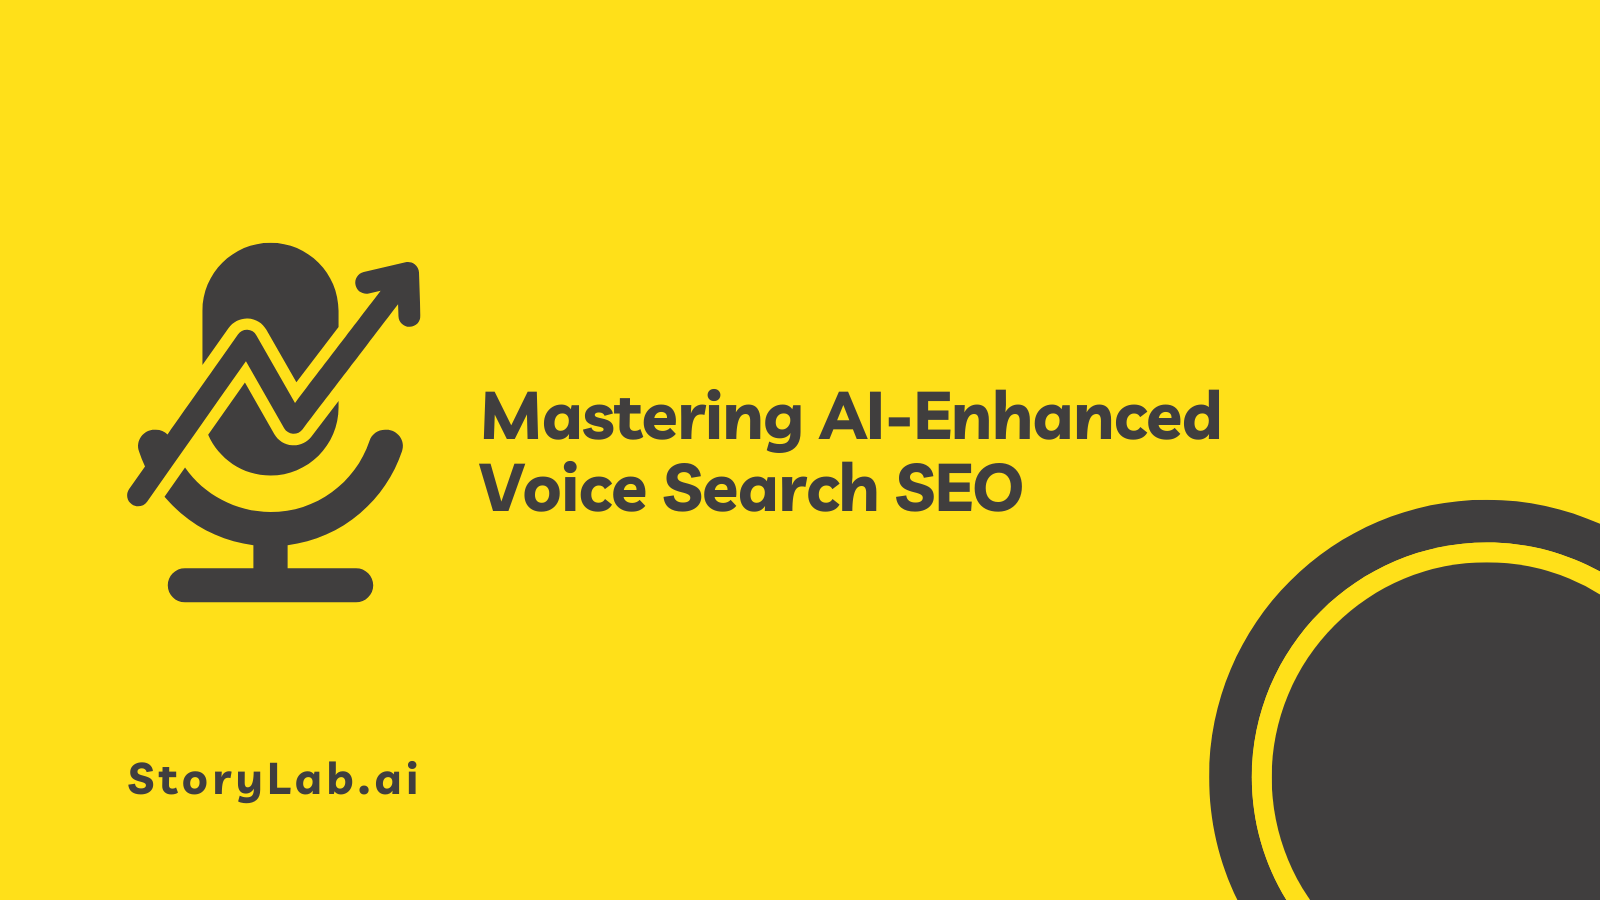 Mastering AI-Enhanced Voice Search SEO - Optimizing for Growth